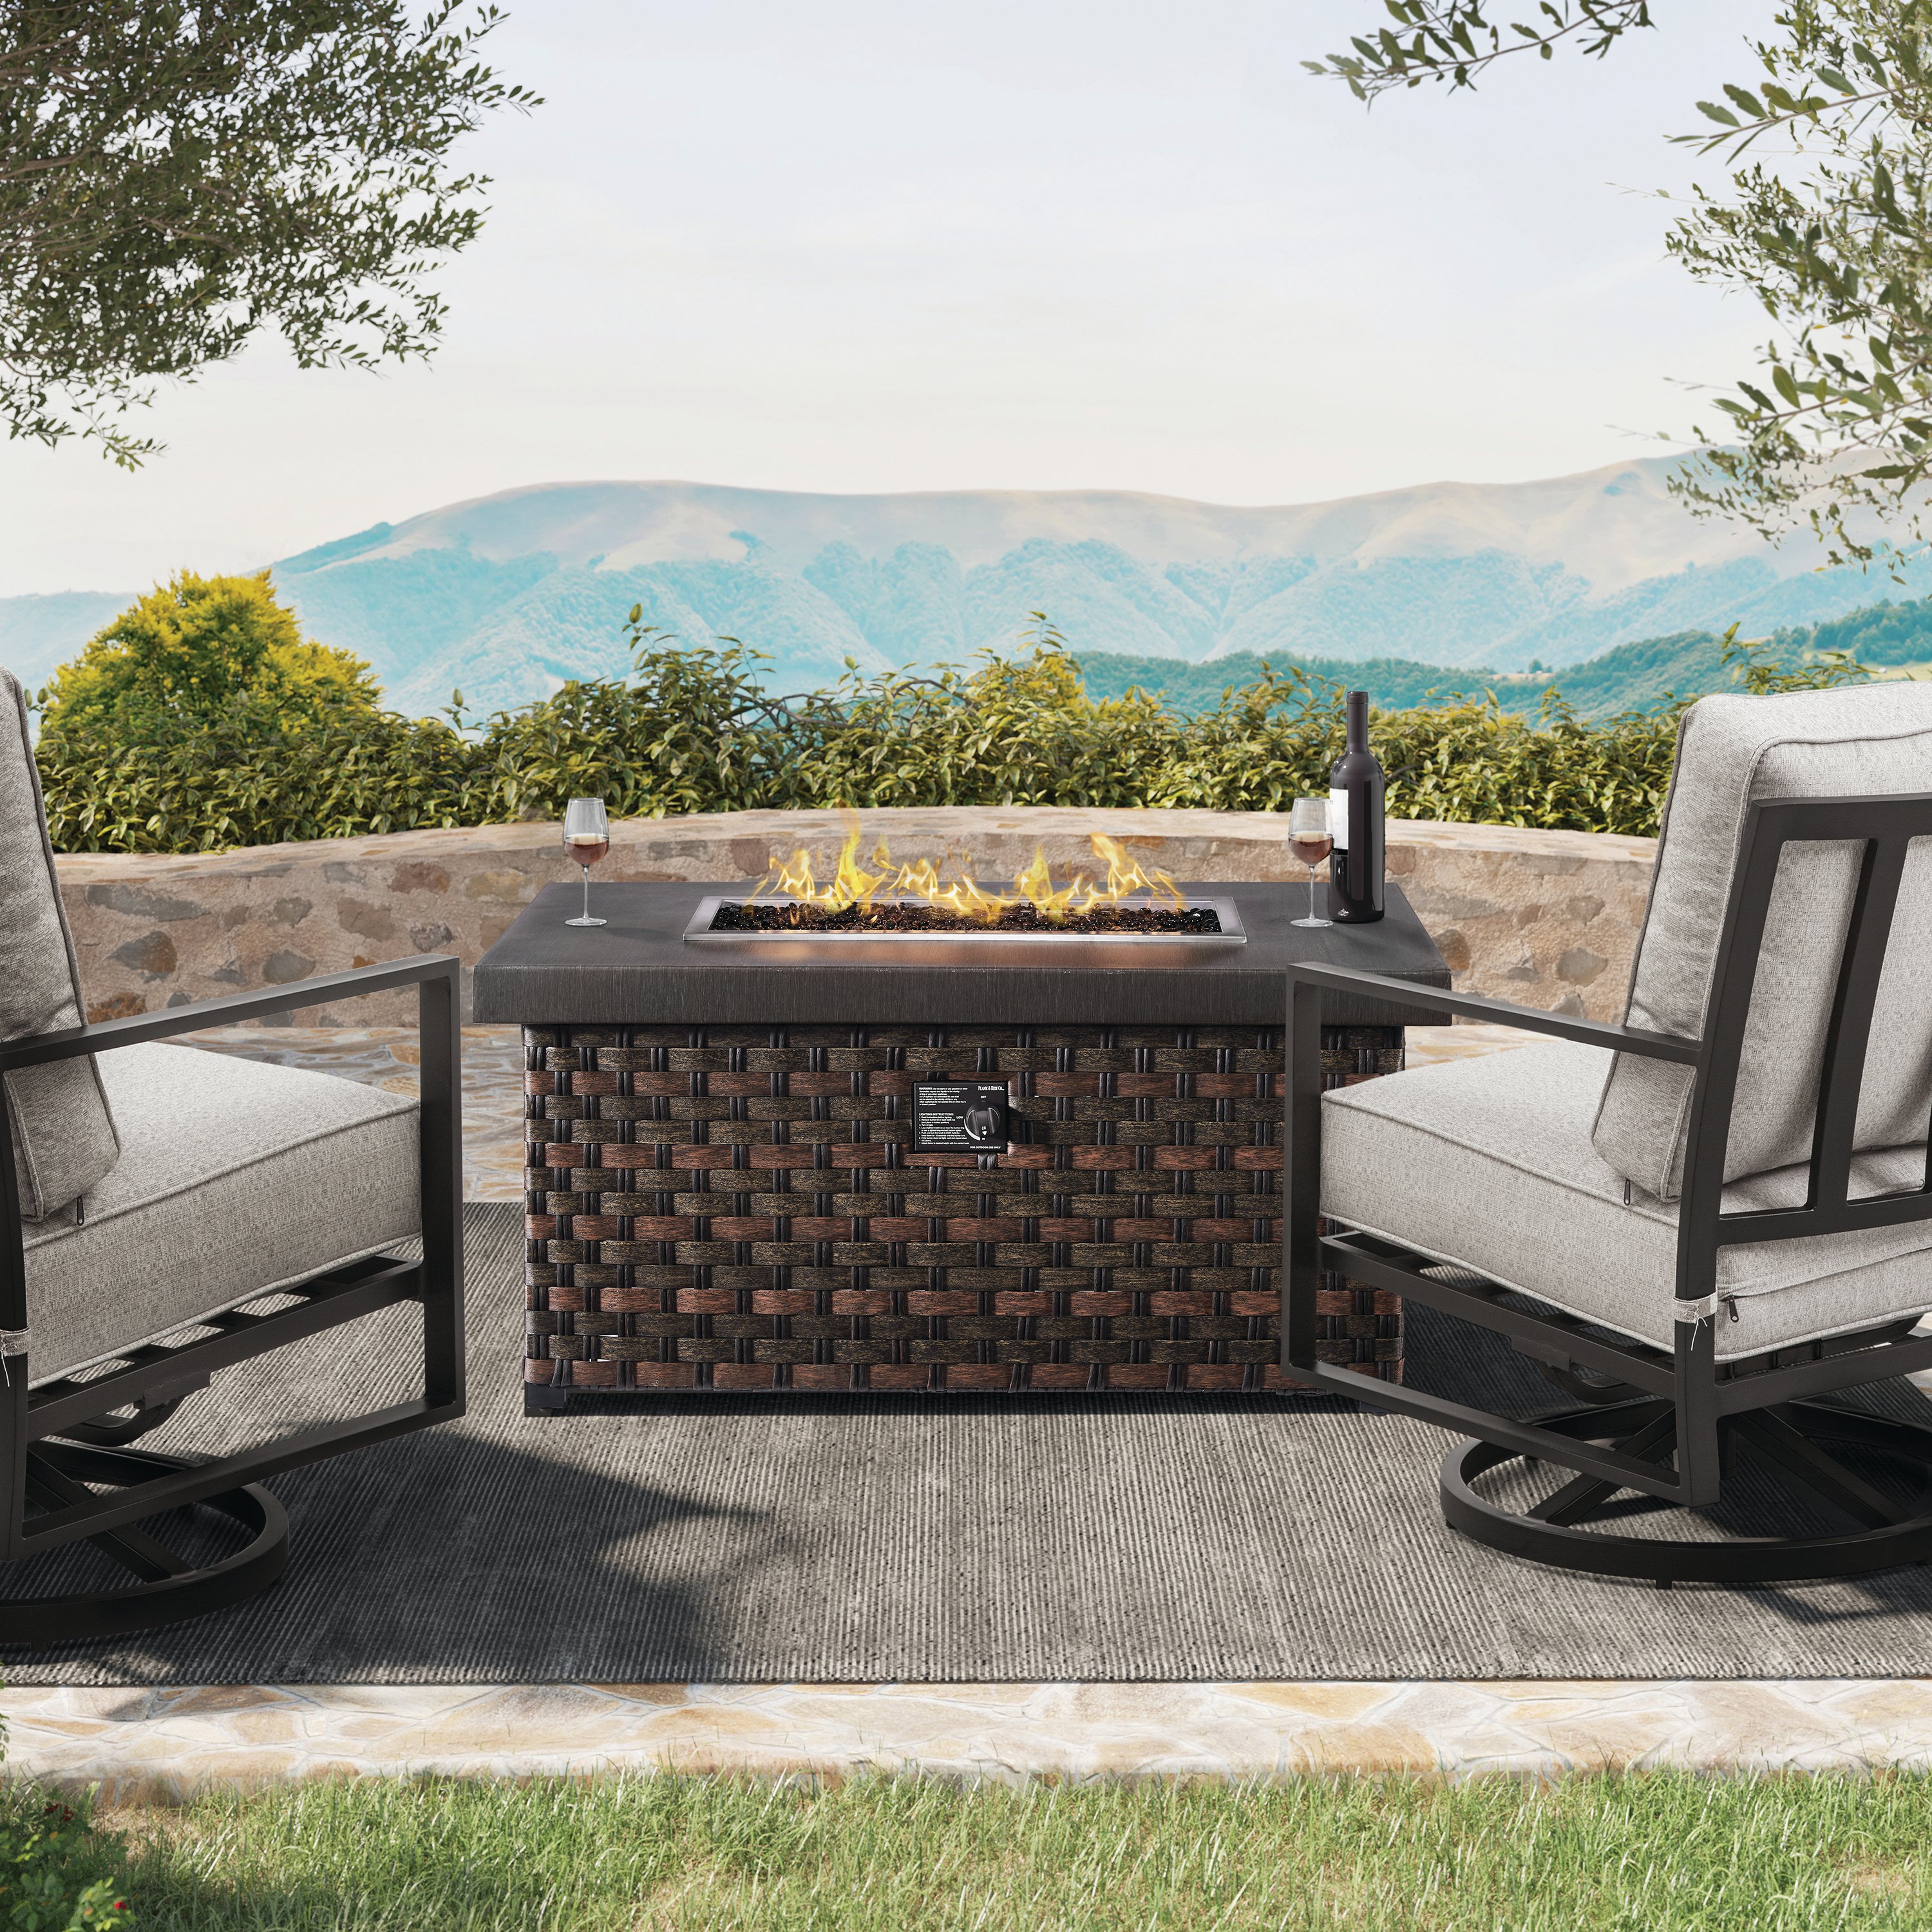 Woven Firepit with Cape Swivel Chairs